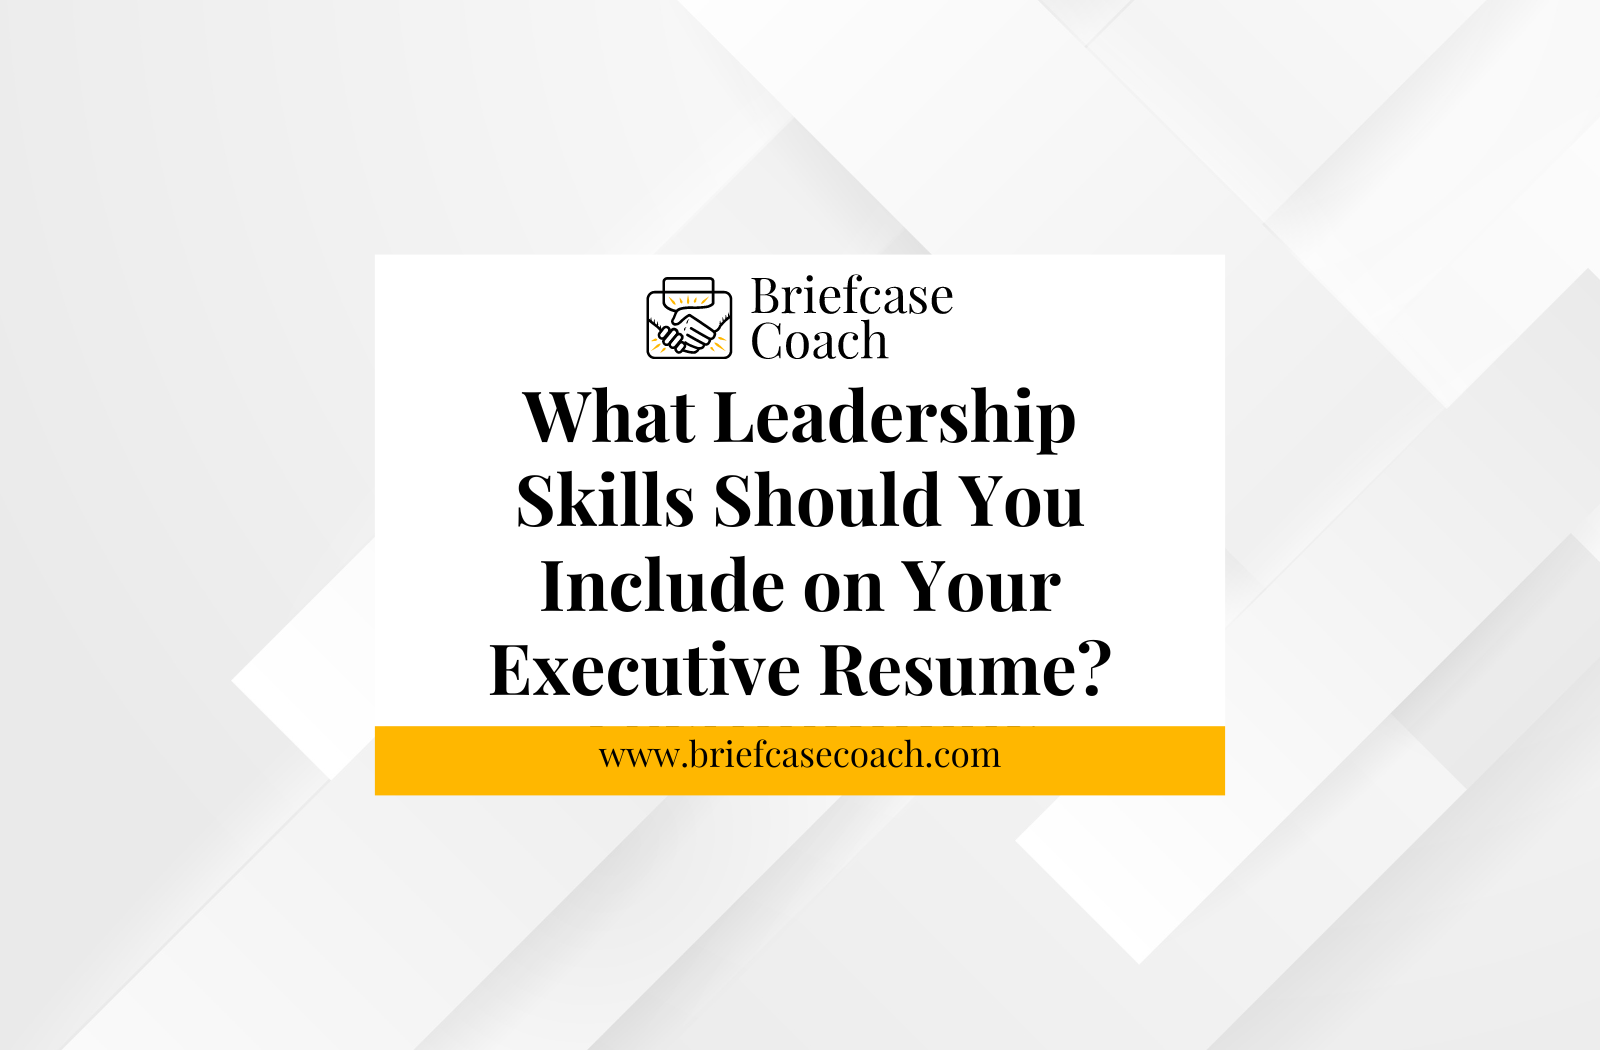 What Leadership Skills Should You Include on Your Executive Resume?